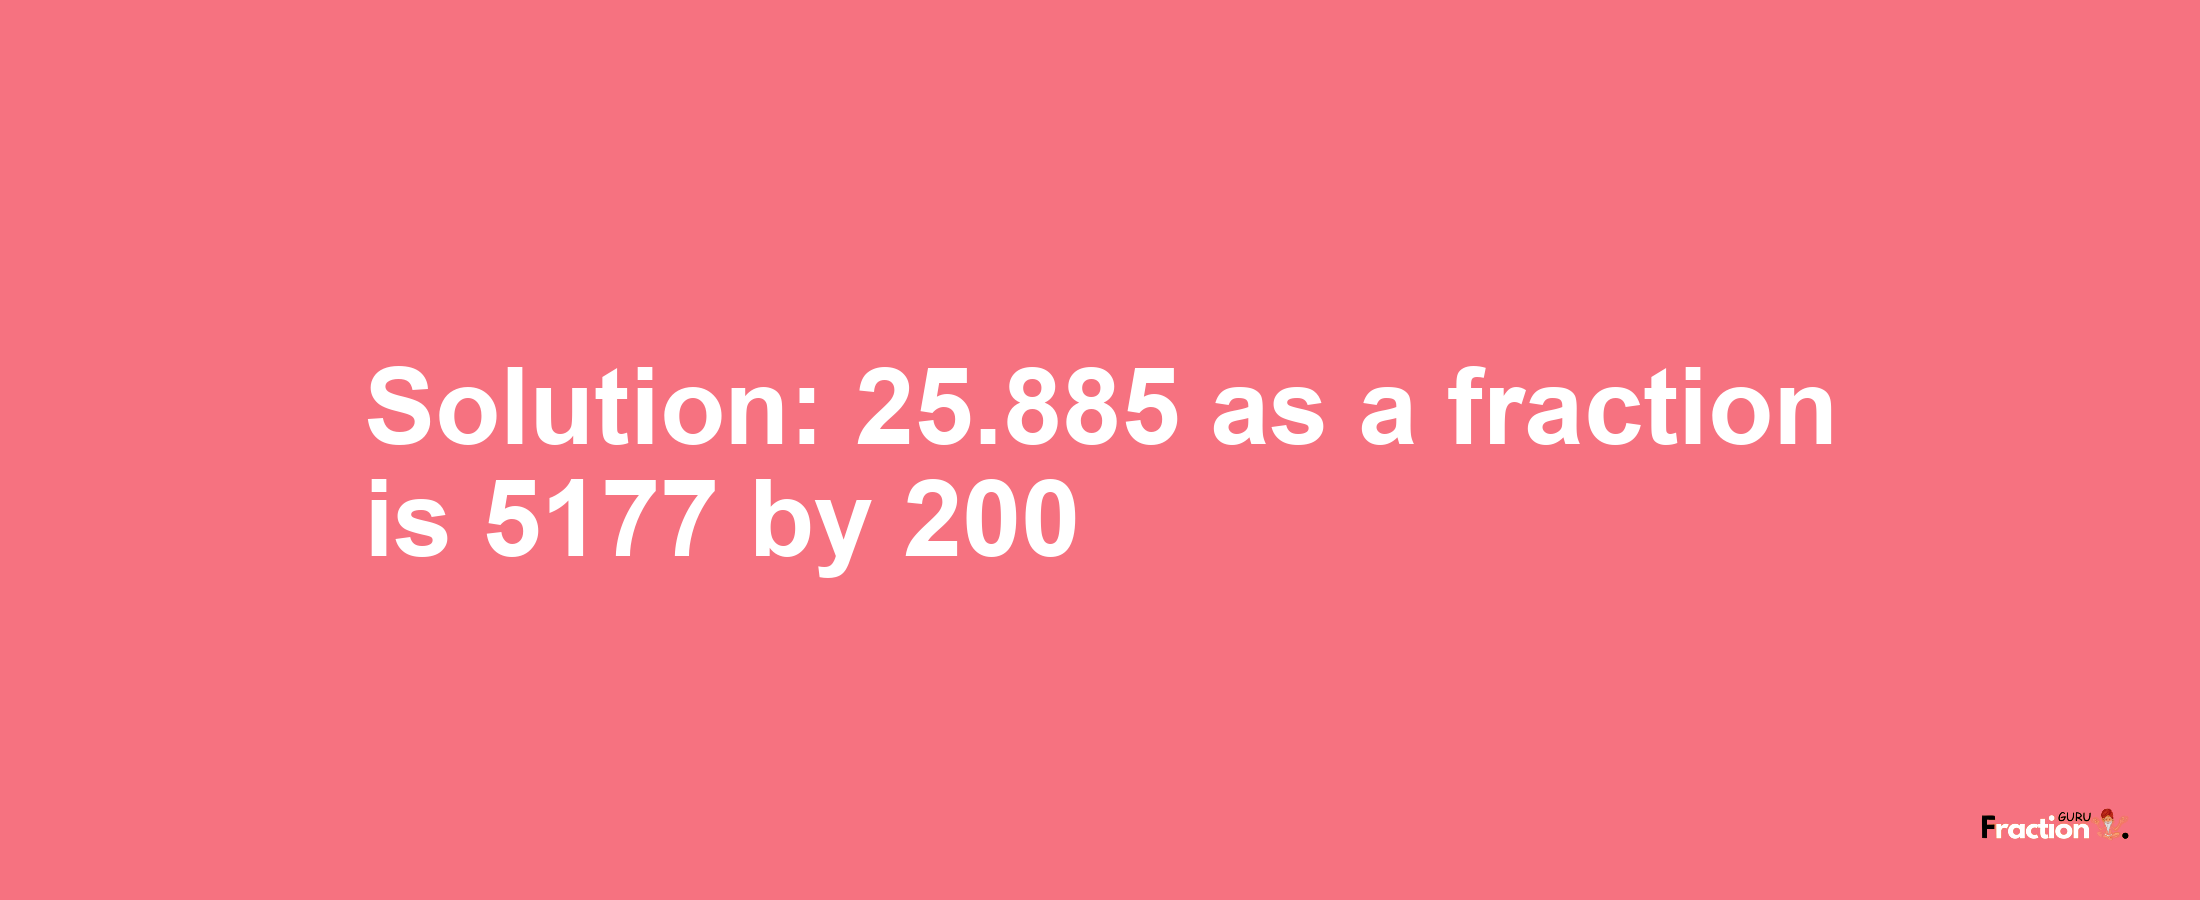 Solution:25.885 as a fraction is 5177/200